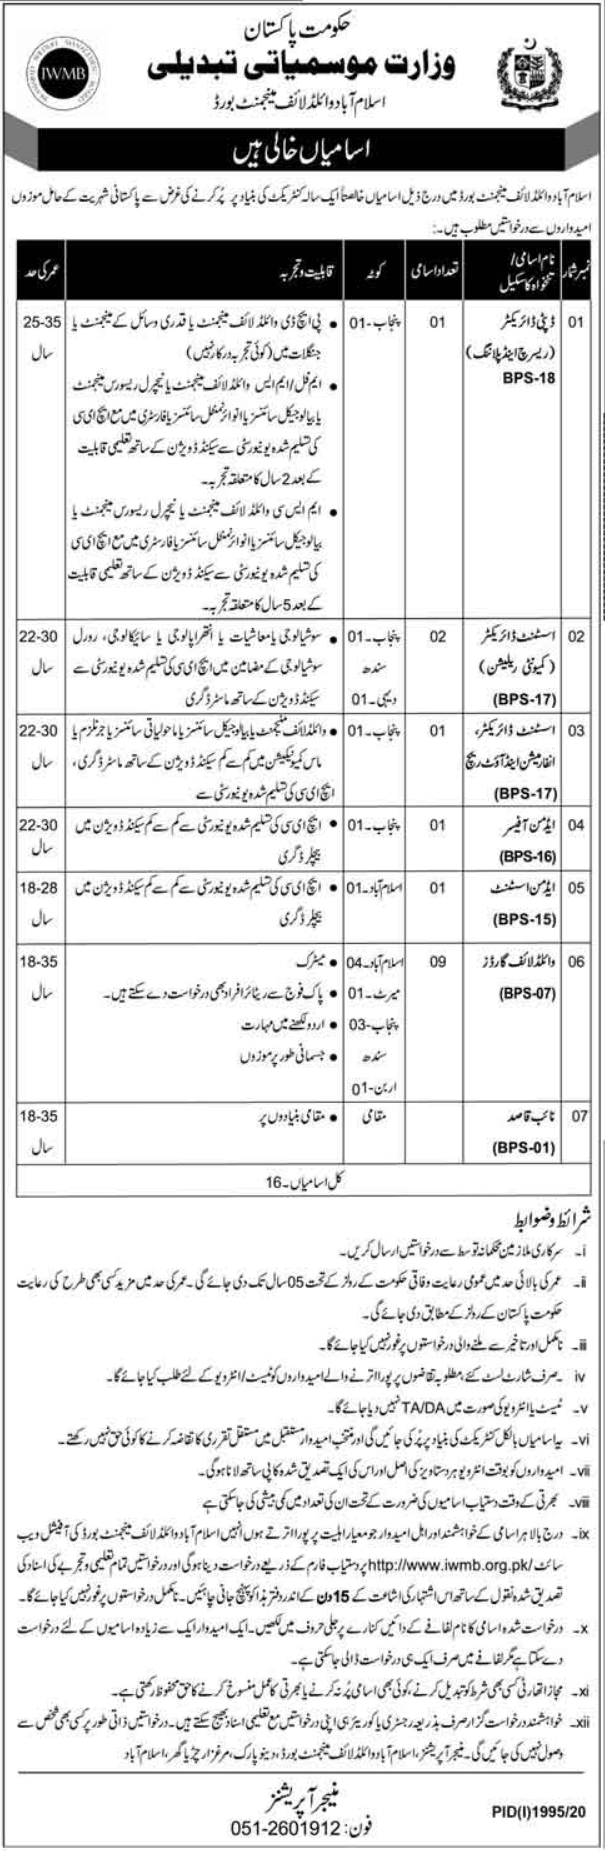 Islamabad Wildlife Management Board Jobs October 2020 IWMB Ministry of Climate Change (MoCC) Latest